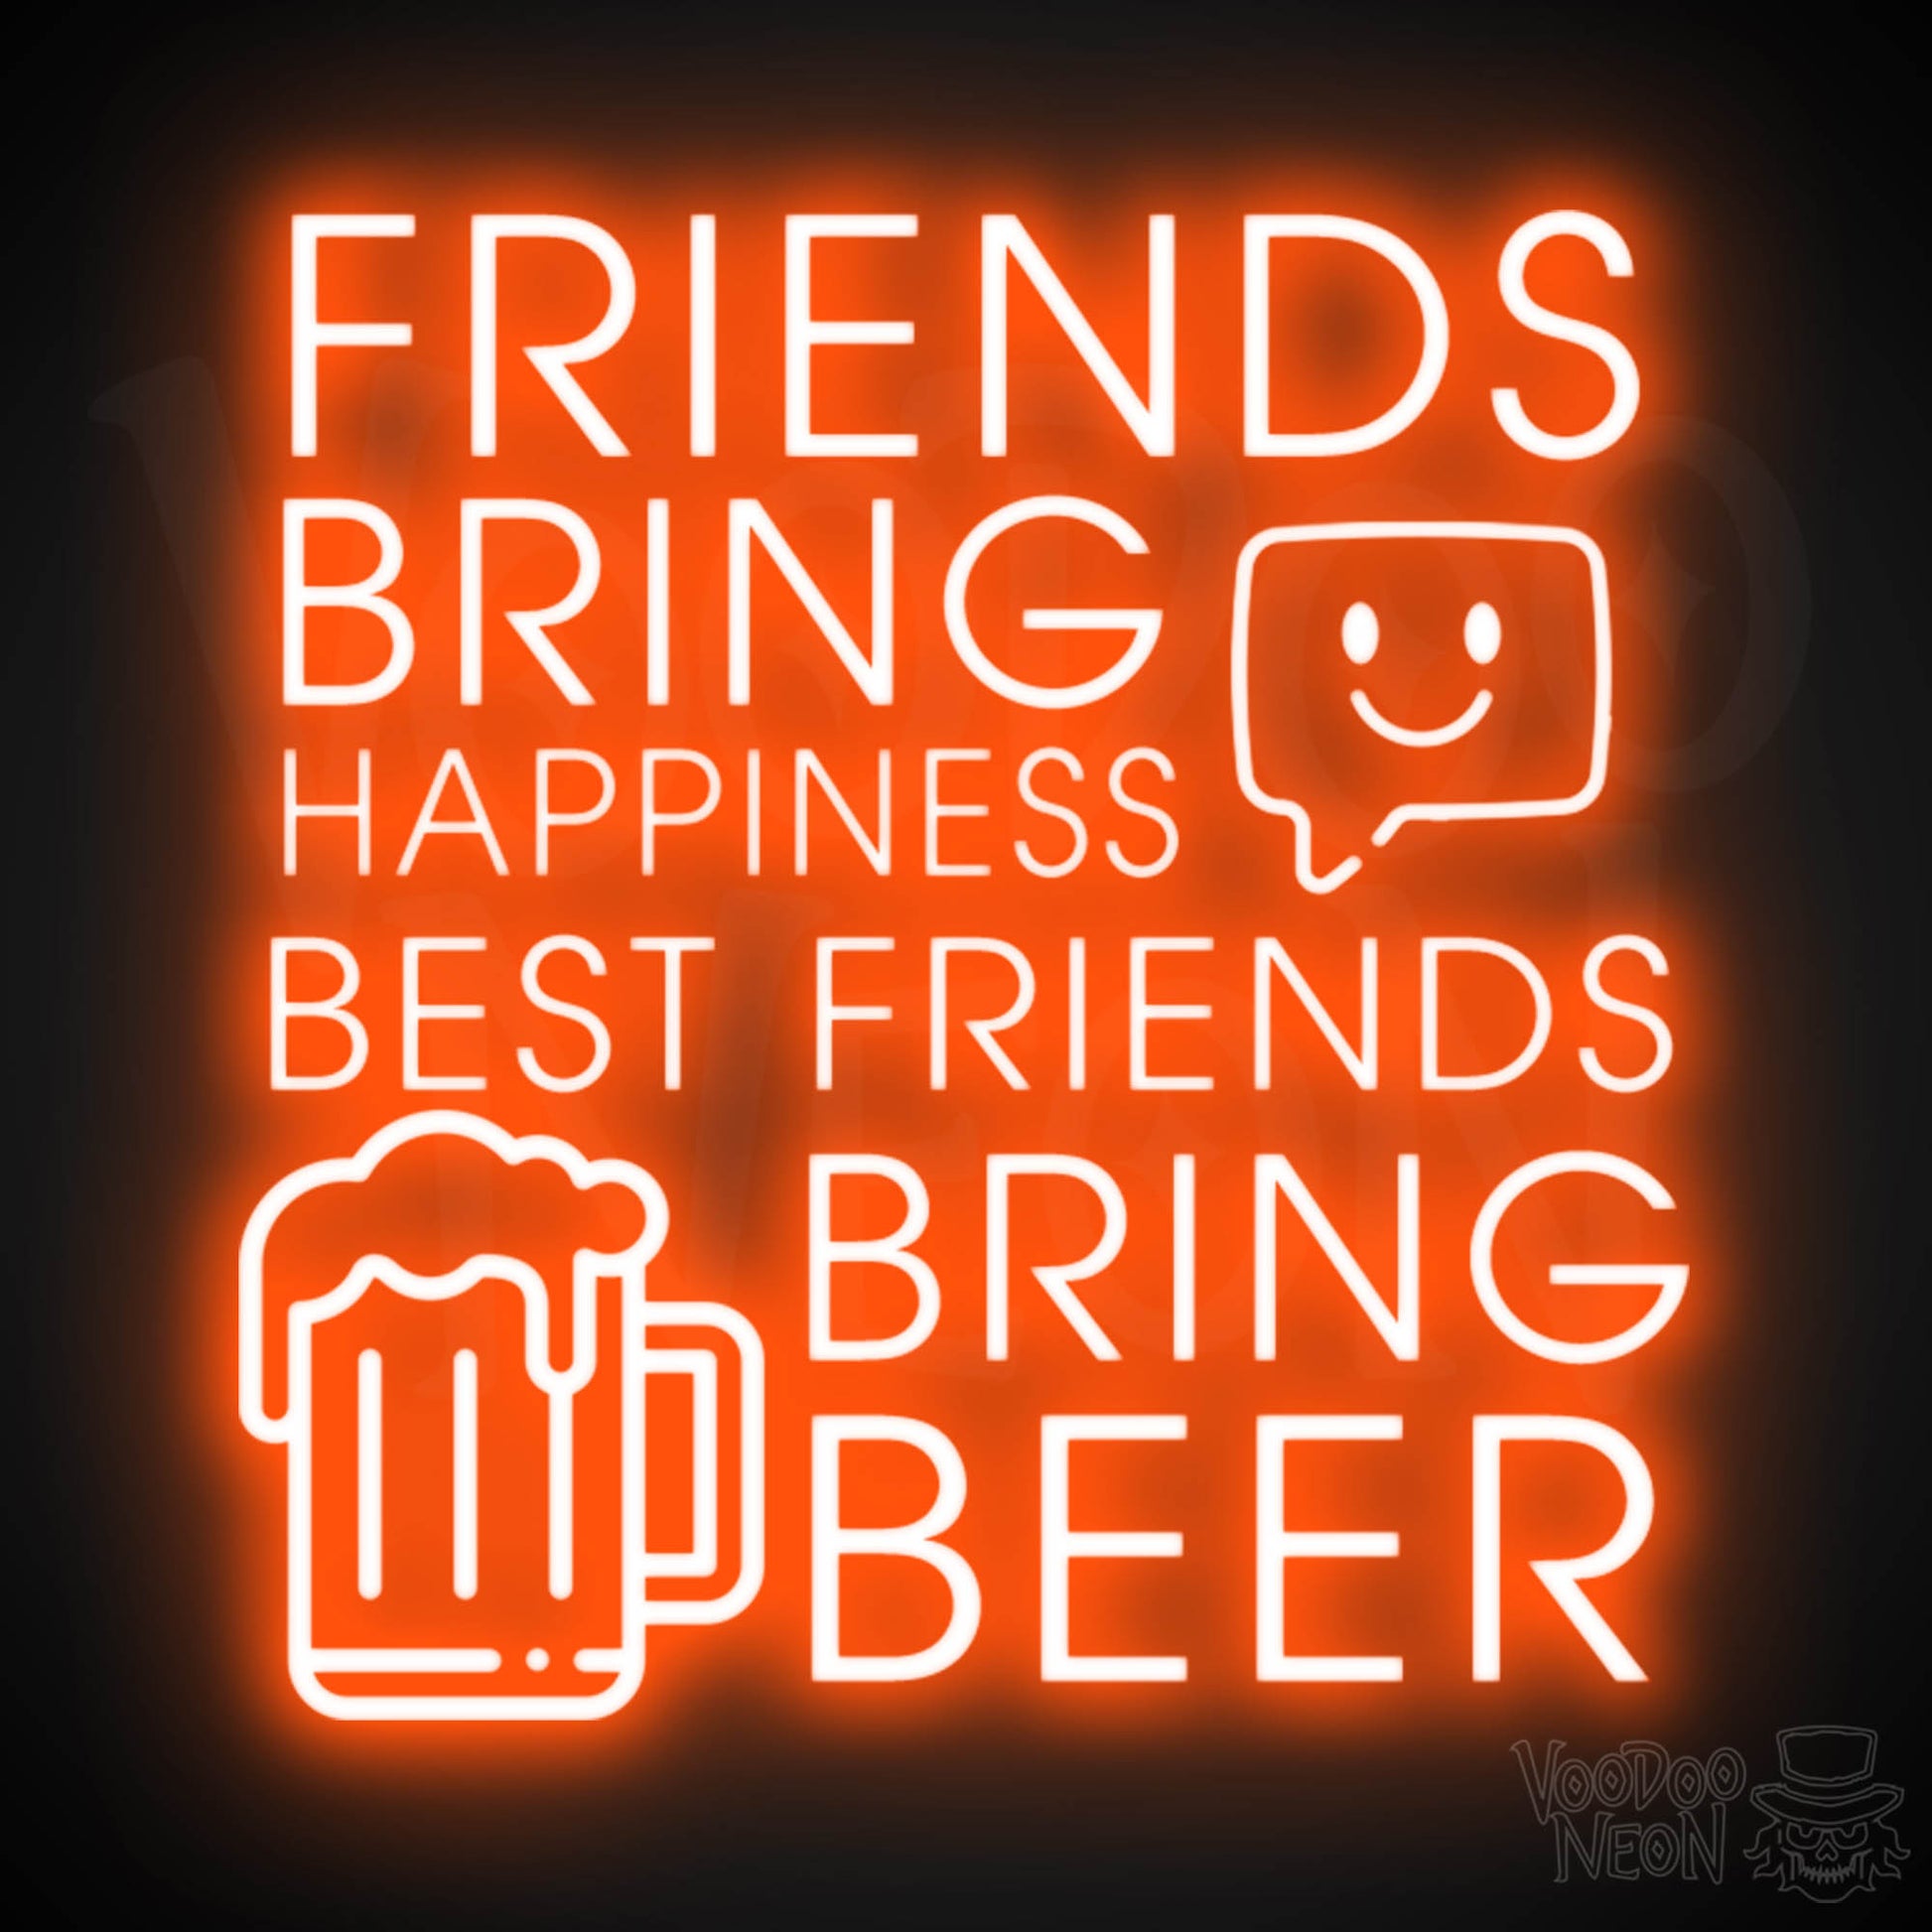 Friends Bring Happiness Best Friends Bring Beer Neon Sign - LED Lights Wall Art - Color Orange